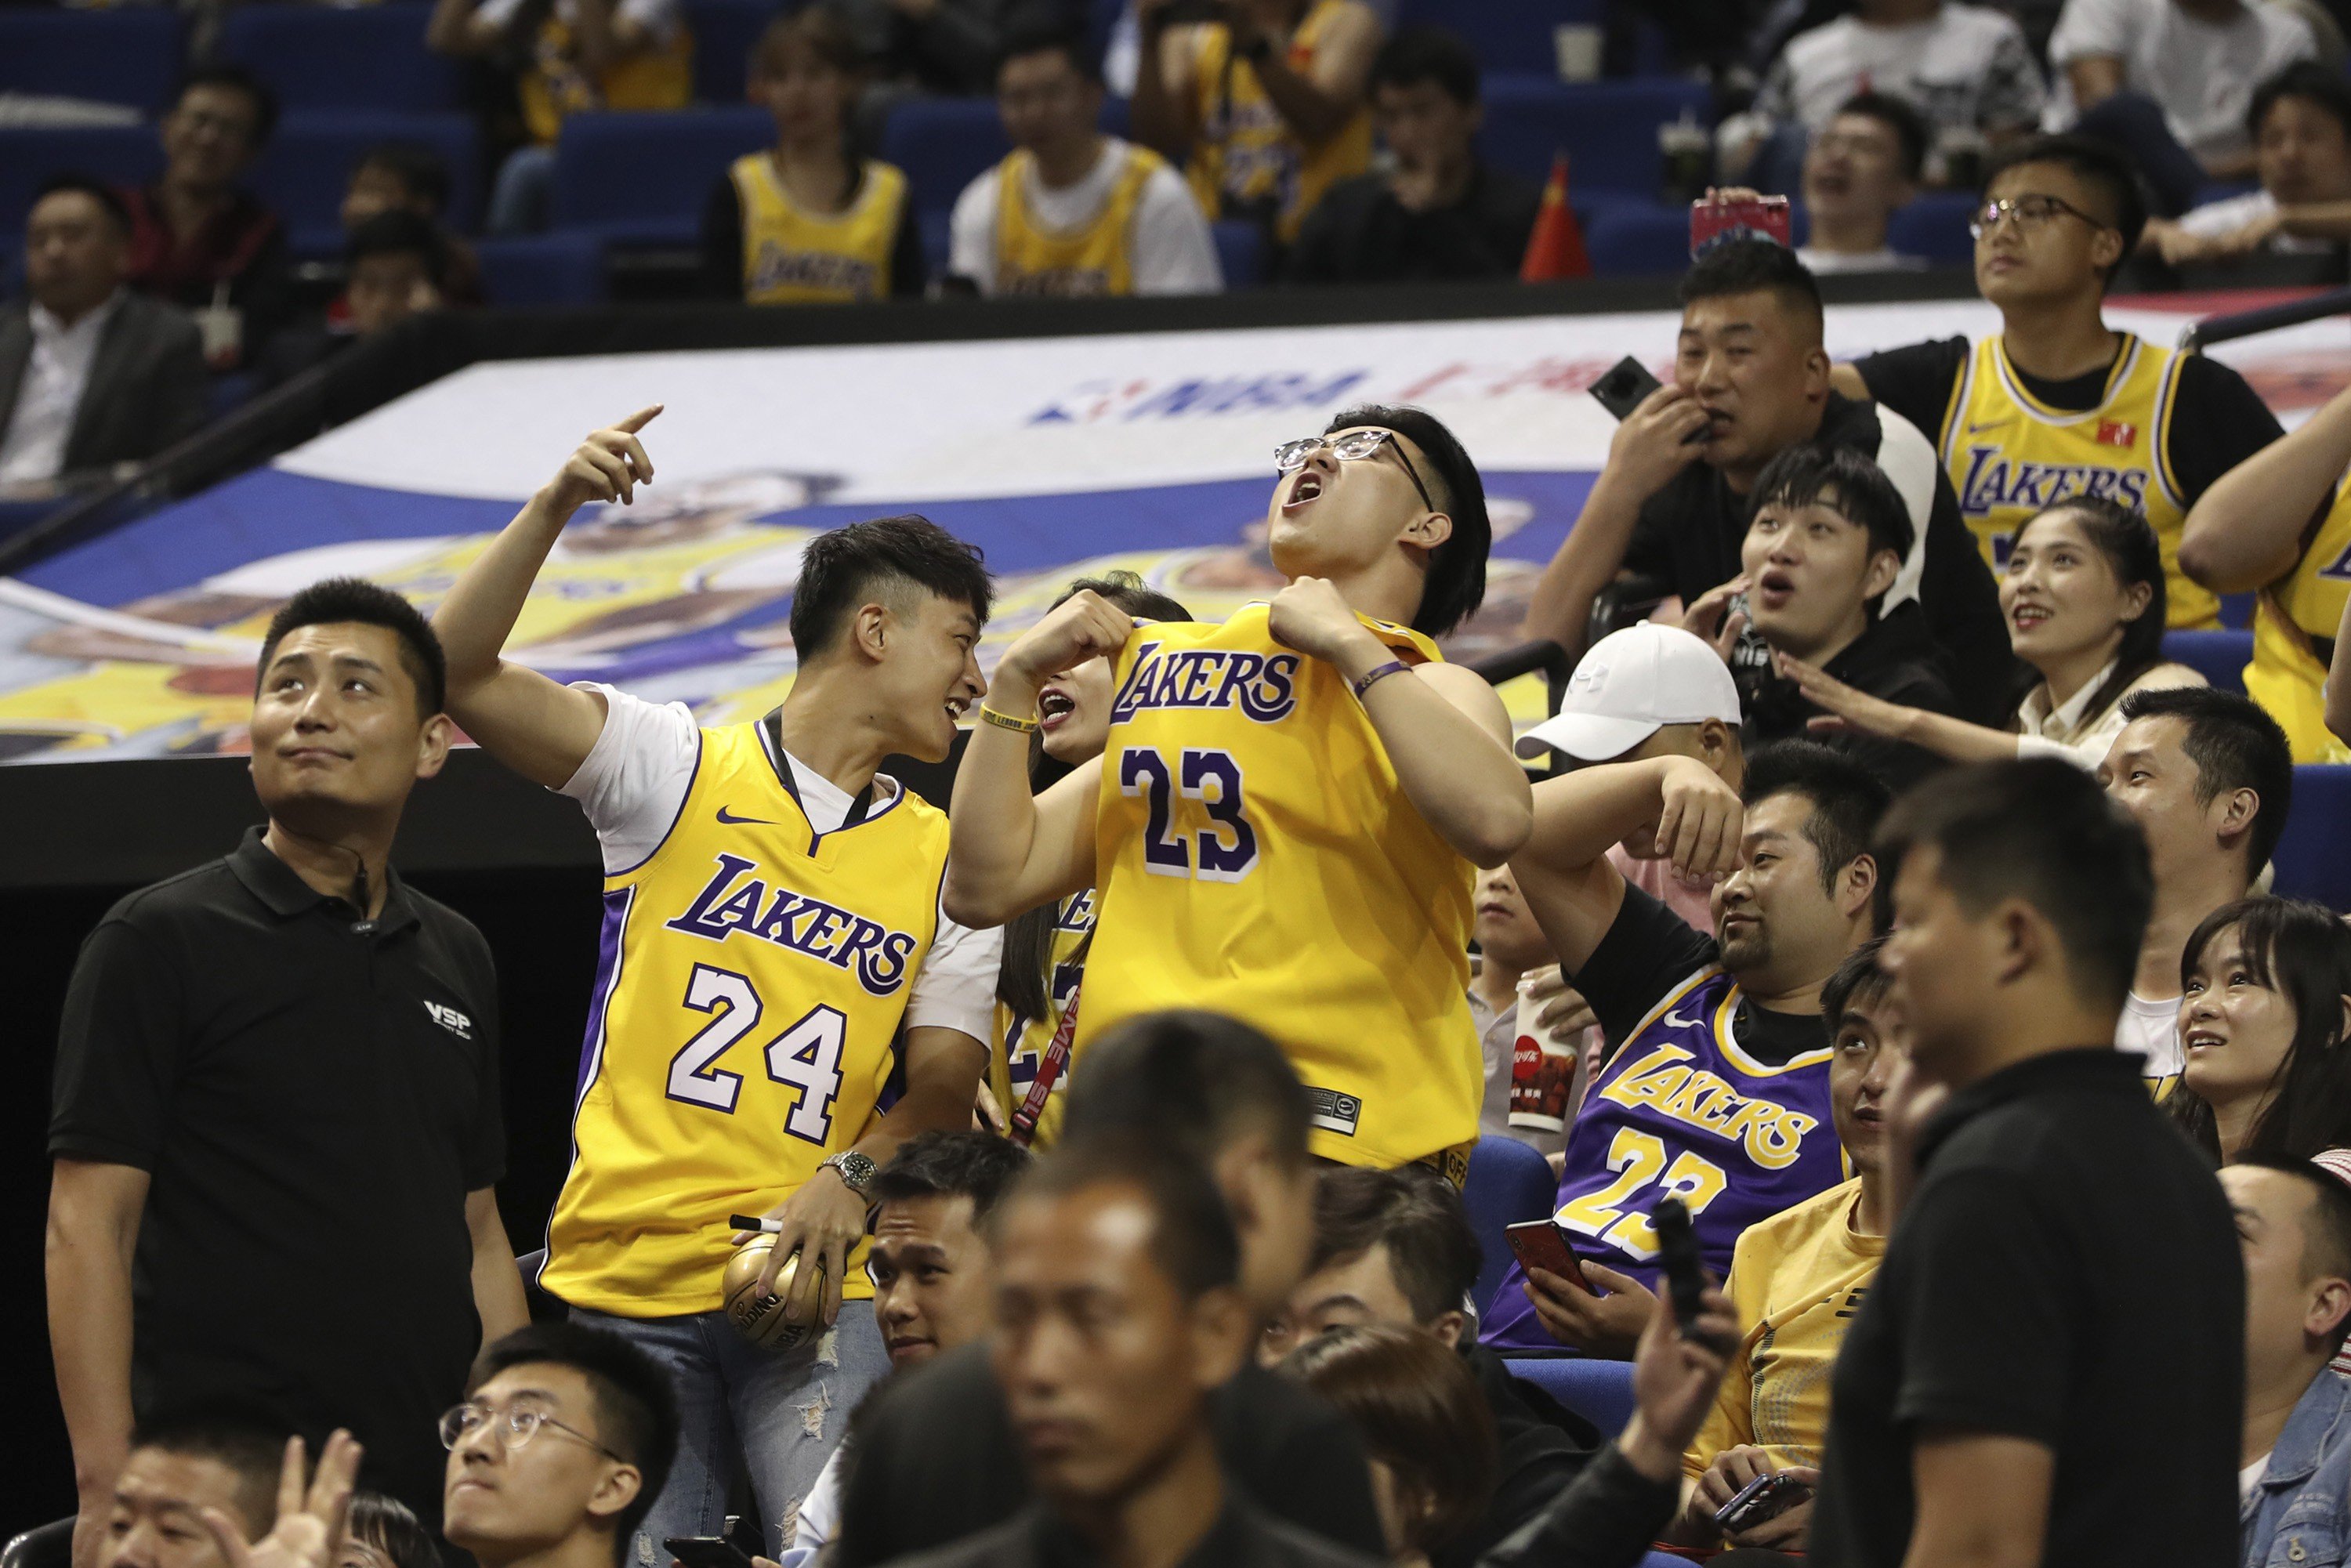 Game over? Meet the Chinese NBA fans calling time out over Daryl ...